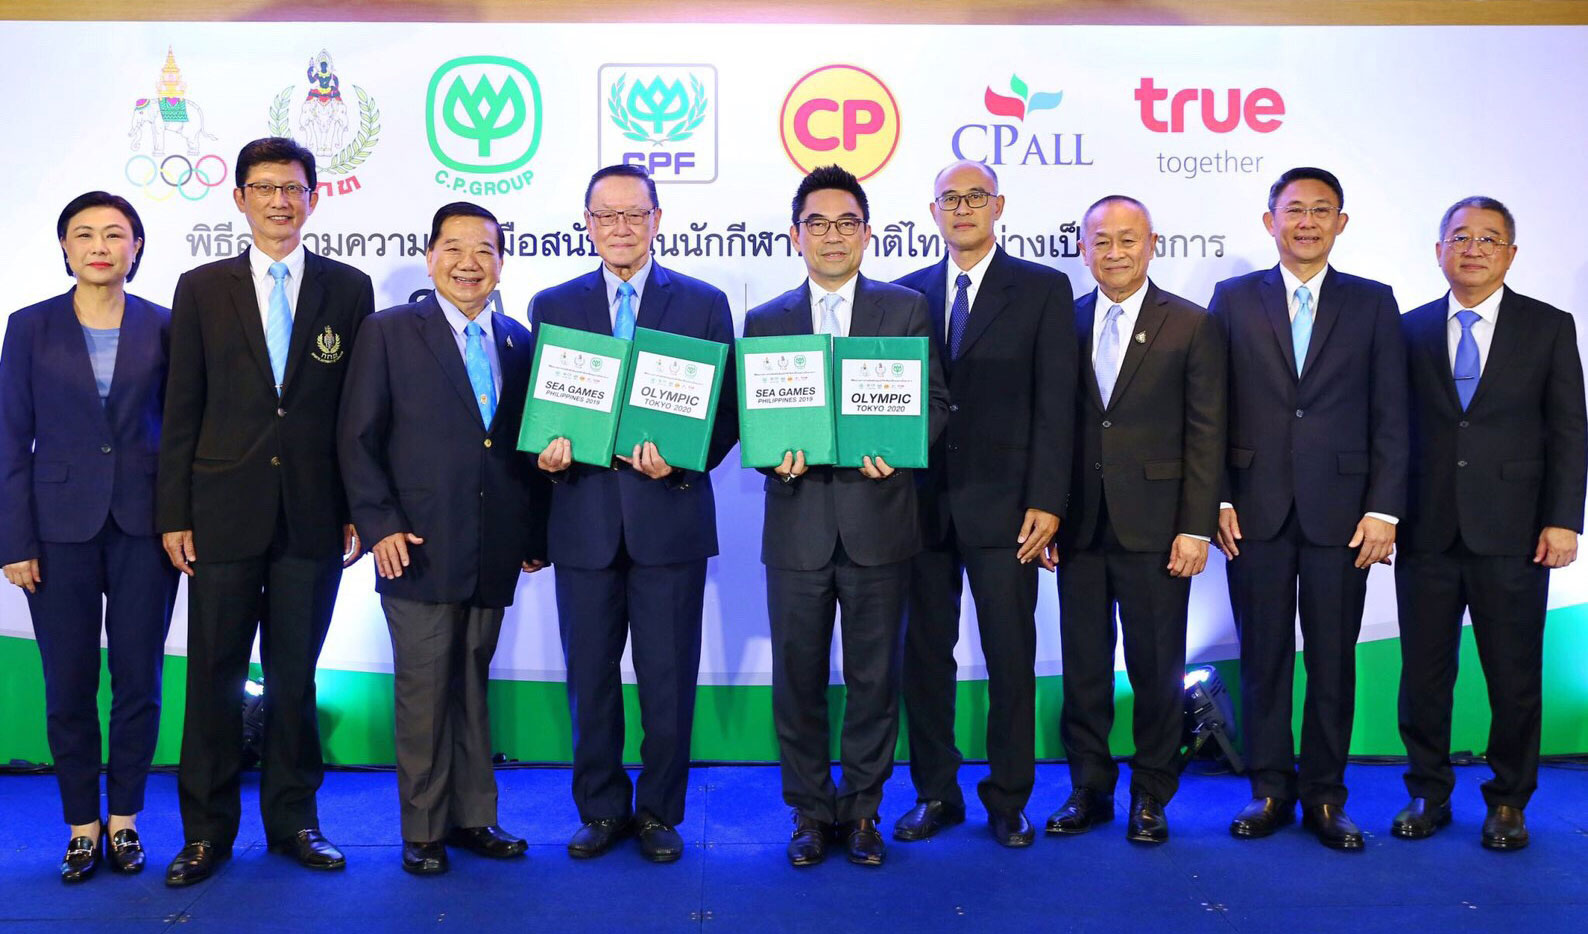 "C.P. Group Supports Food and Telecommunications for Thailand's 'SEA Games & Olympic' Teams"